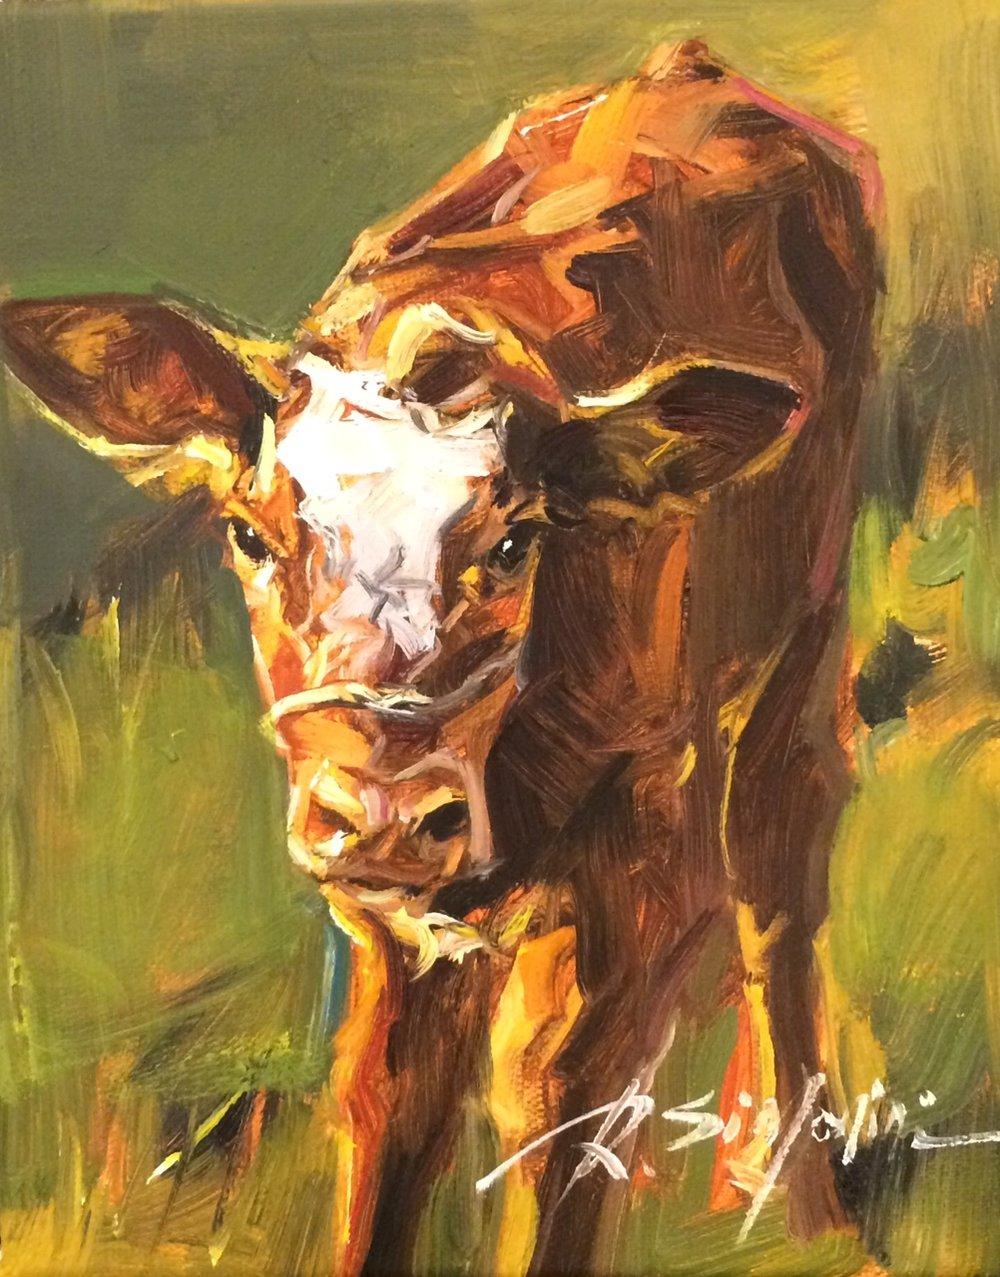 This painting by artist Ray Simonini titled "Cinnamon" is a 10x8 farm animal oil painting on canvas featuring a portrait of a cinnamon colored cow against a colorful green background. Afternoon sunlight wraps the cow's hide in a warm glow. 

About